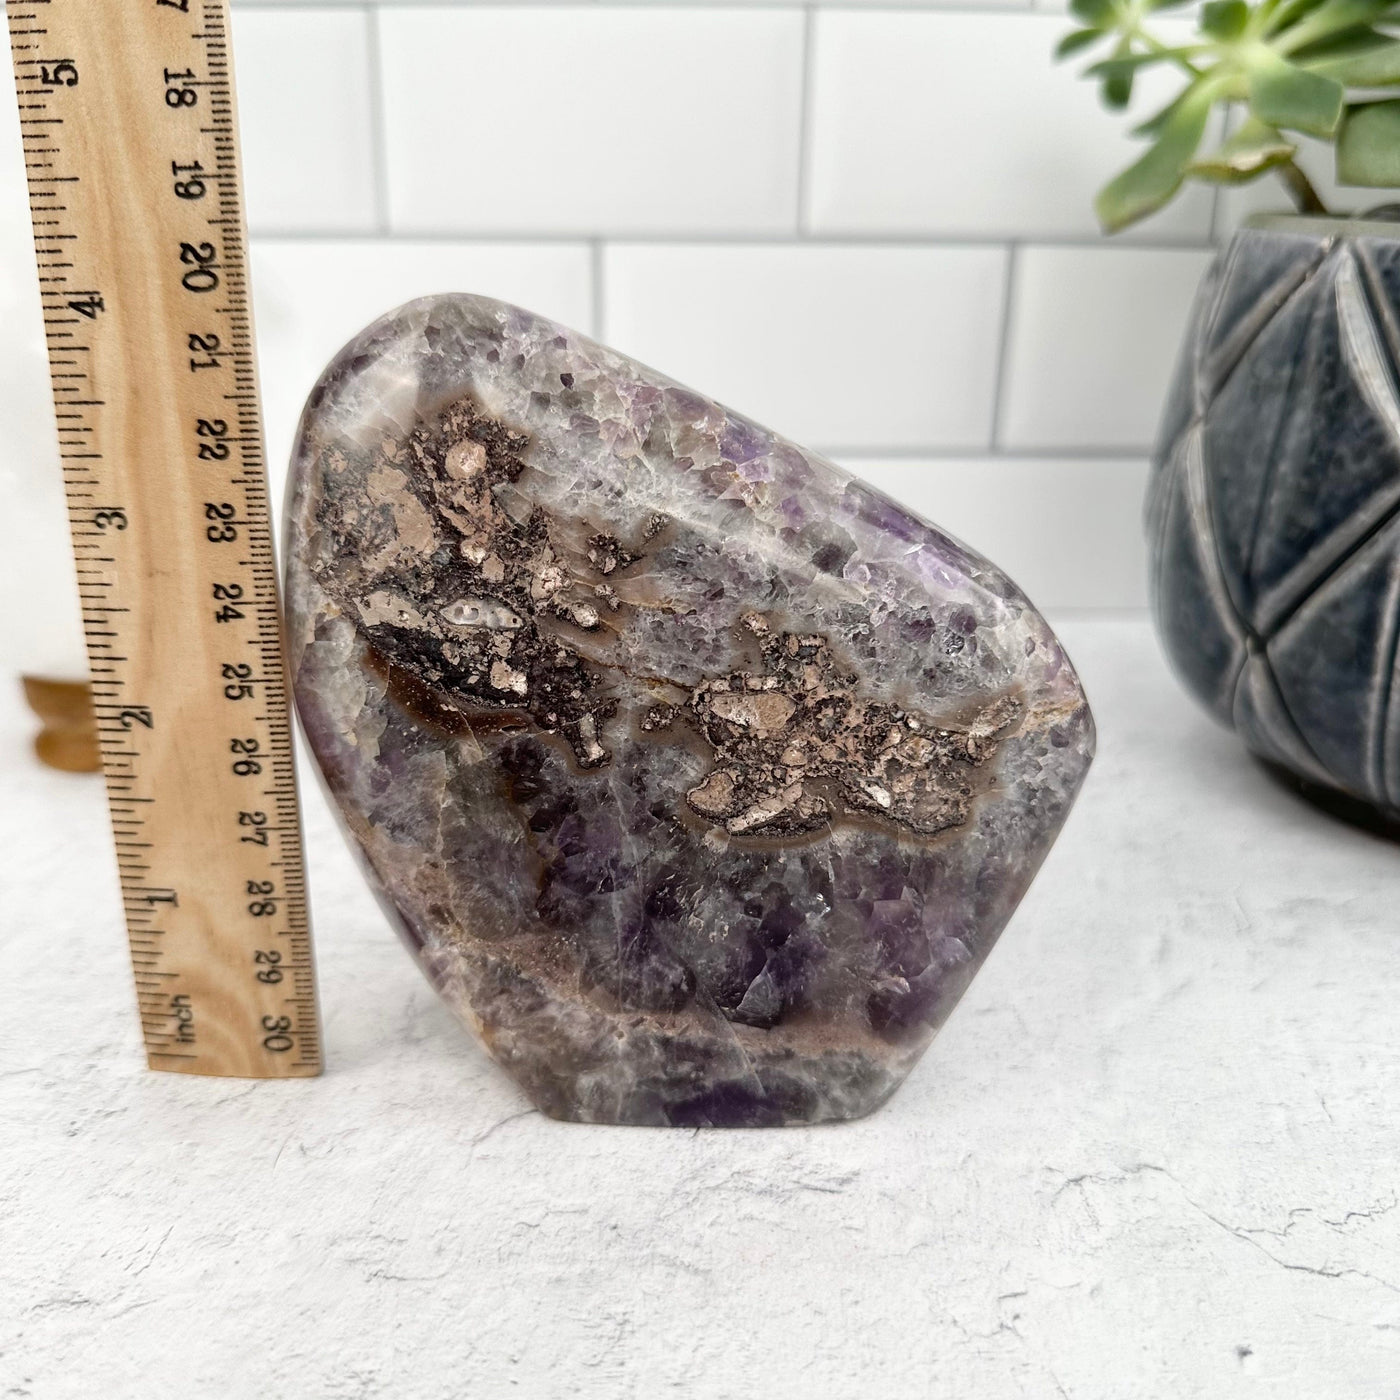 Chevron Amethyst Polished Freeform - OOAK - with ruler for size reference   